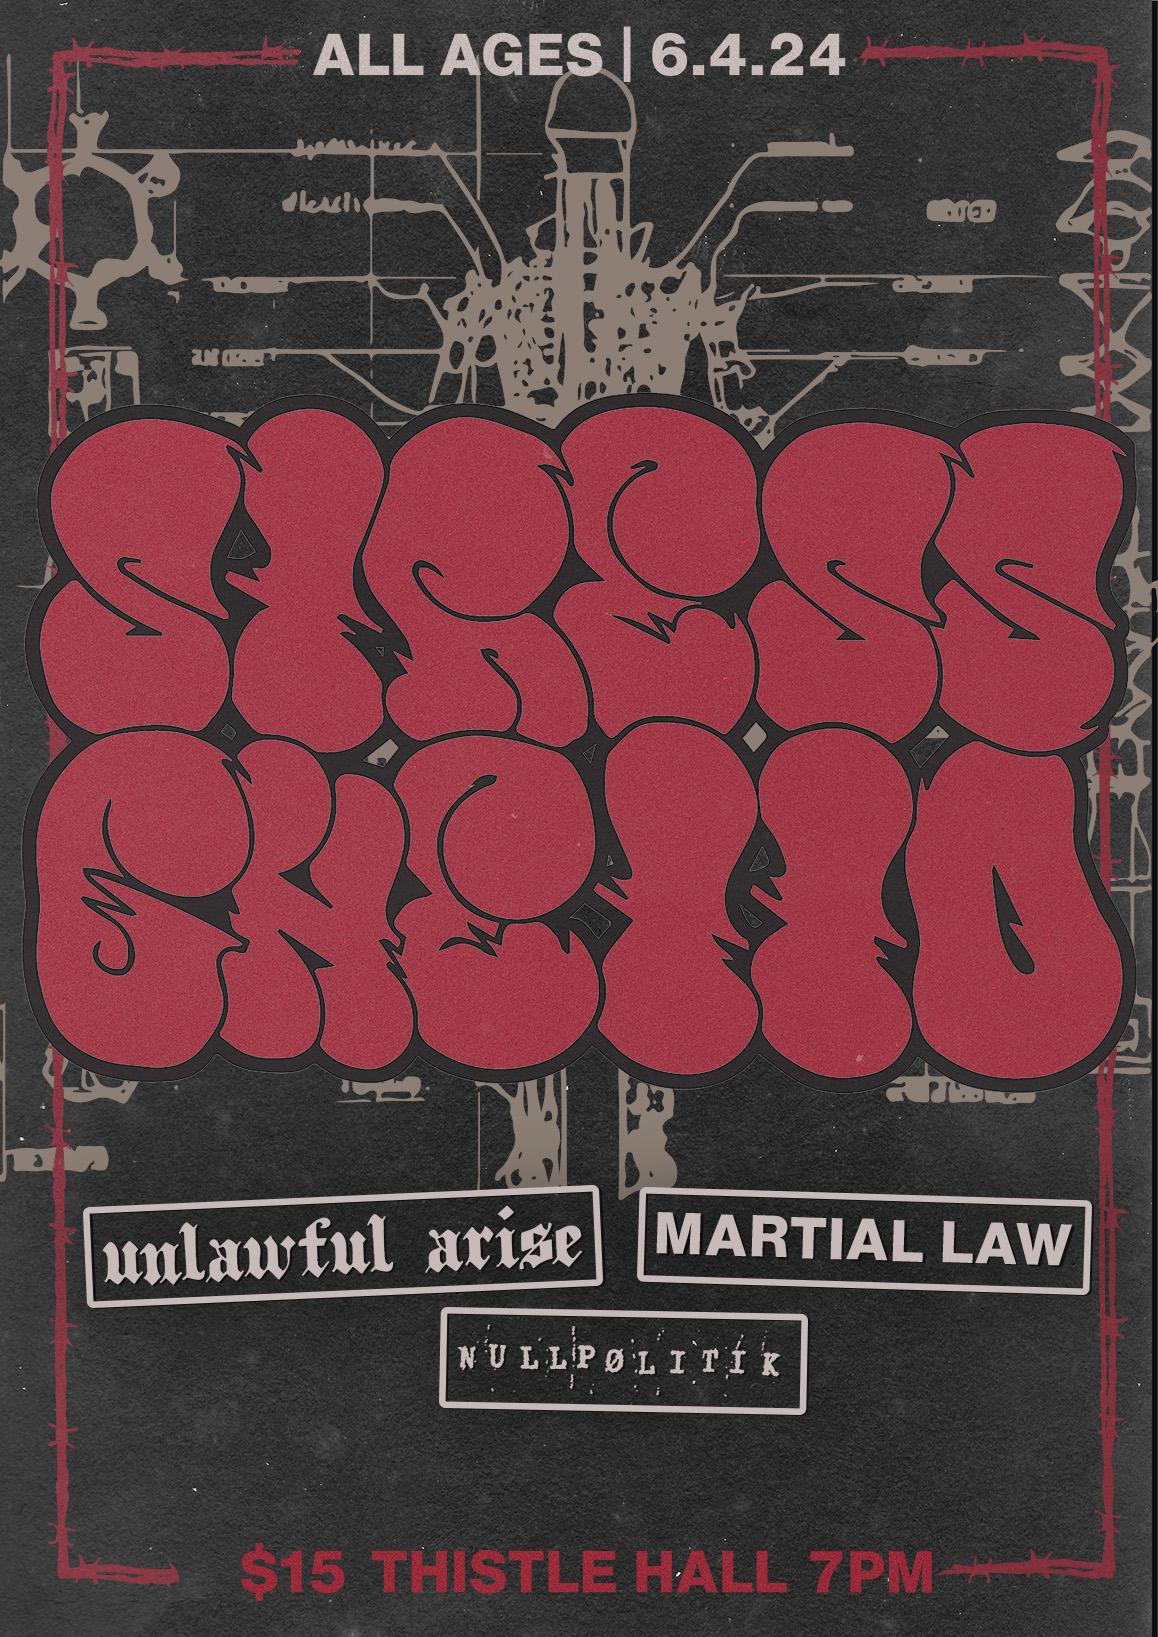 Gig poster for Stress Ghetto, Unlawful Arise, Martial Law And Nullpolitik.